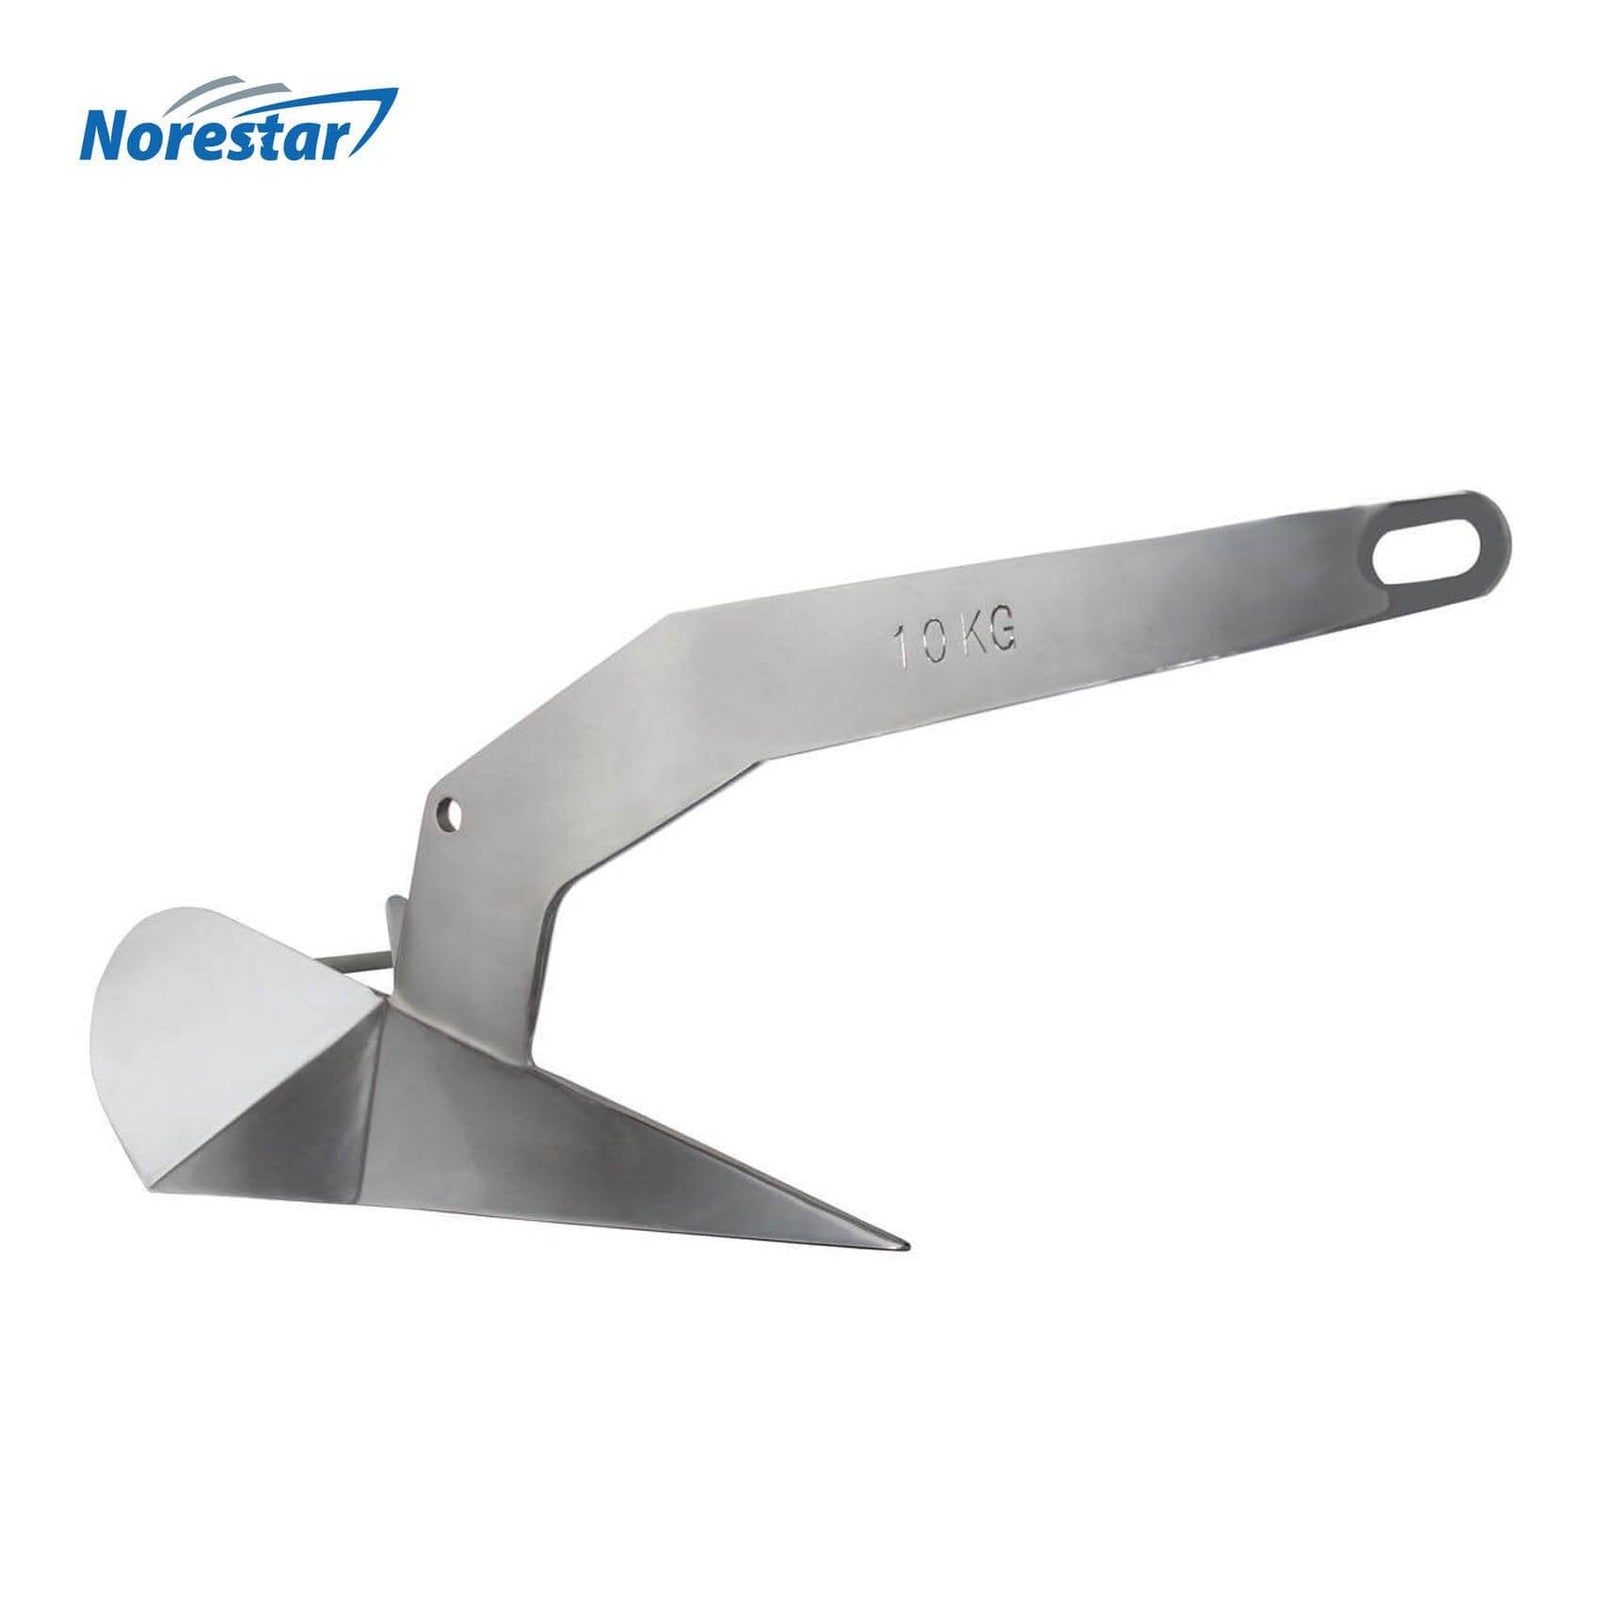 Stainless Steel Wing/Delta Boat Anchor by Norestar